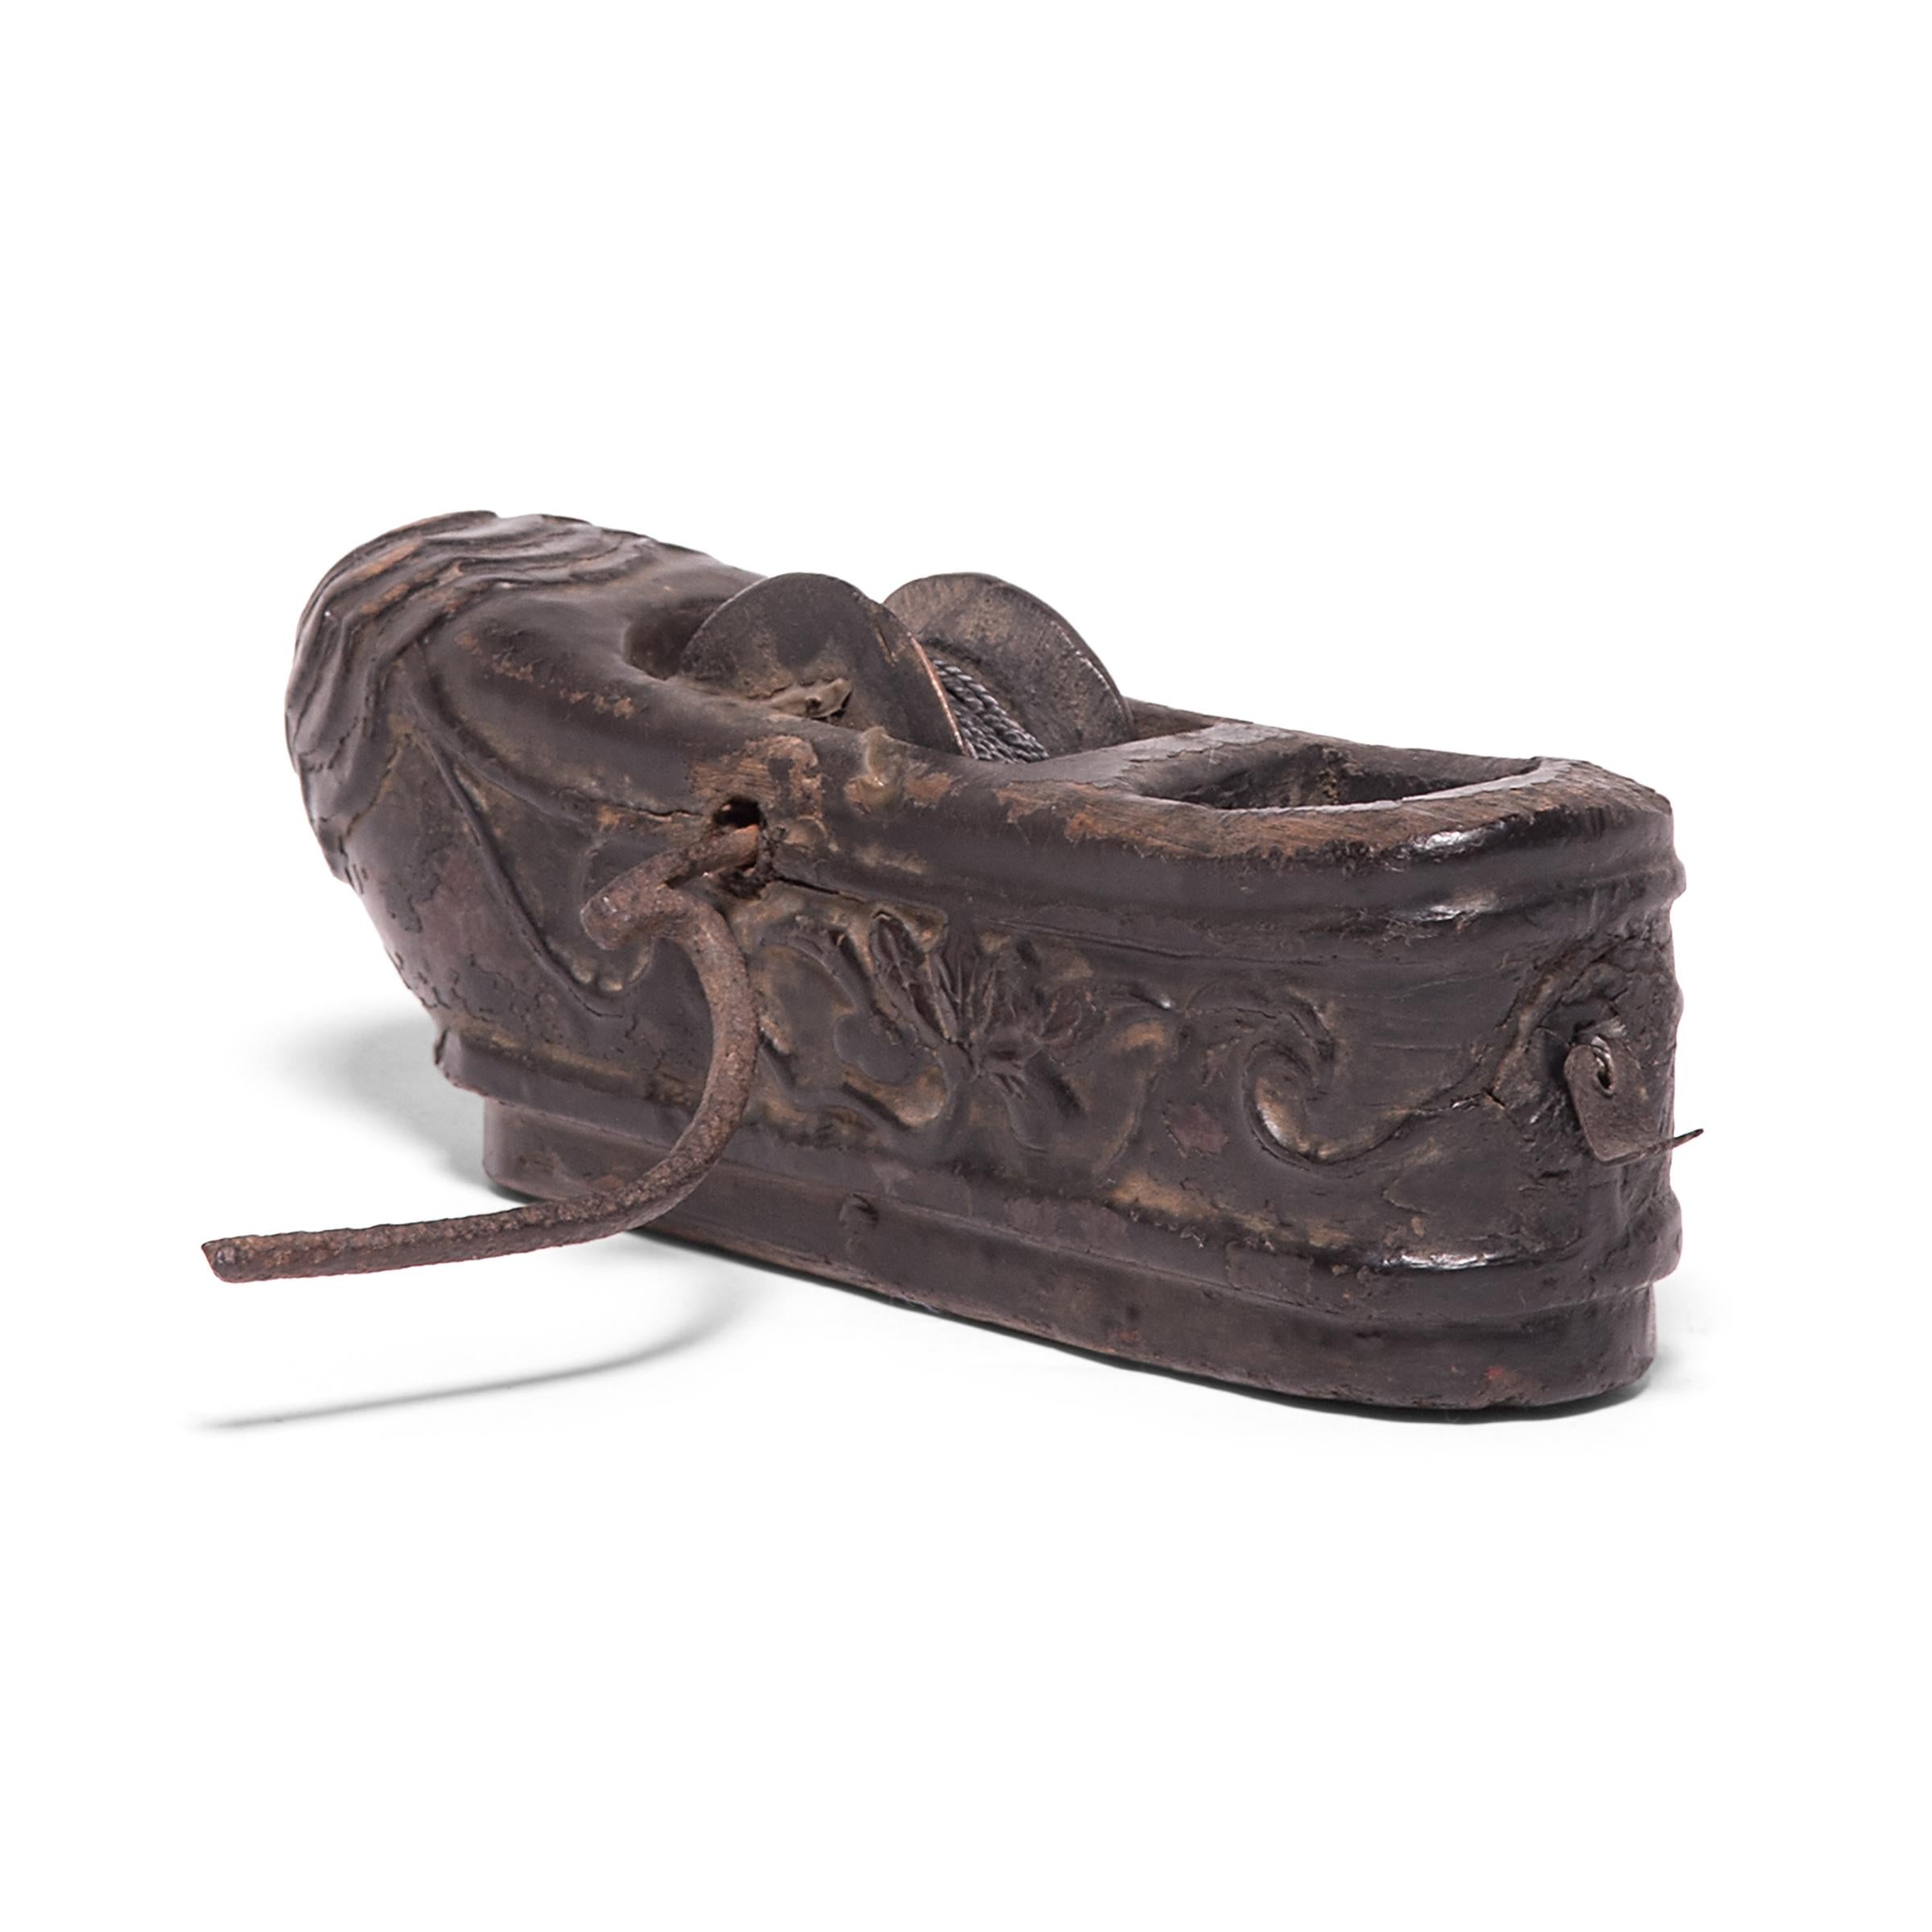 Given the beauty and thoughtful design of traditional Chinese furniture, it’s no wonder that Qing-dynasty carpenter’s tools were accorded the same attention to detail. This remarkably intact 19th-century ink line reel was carved in the form of a